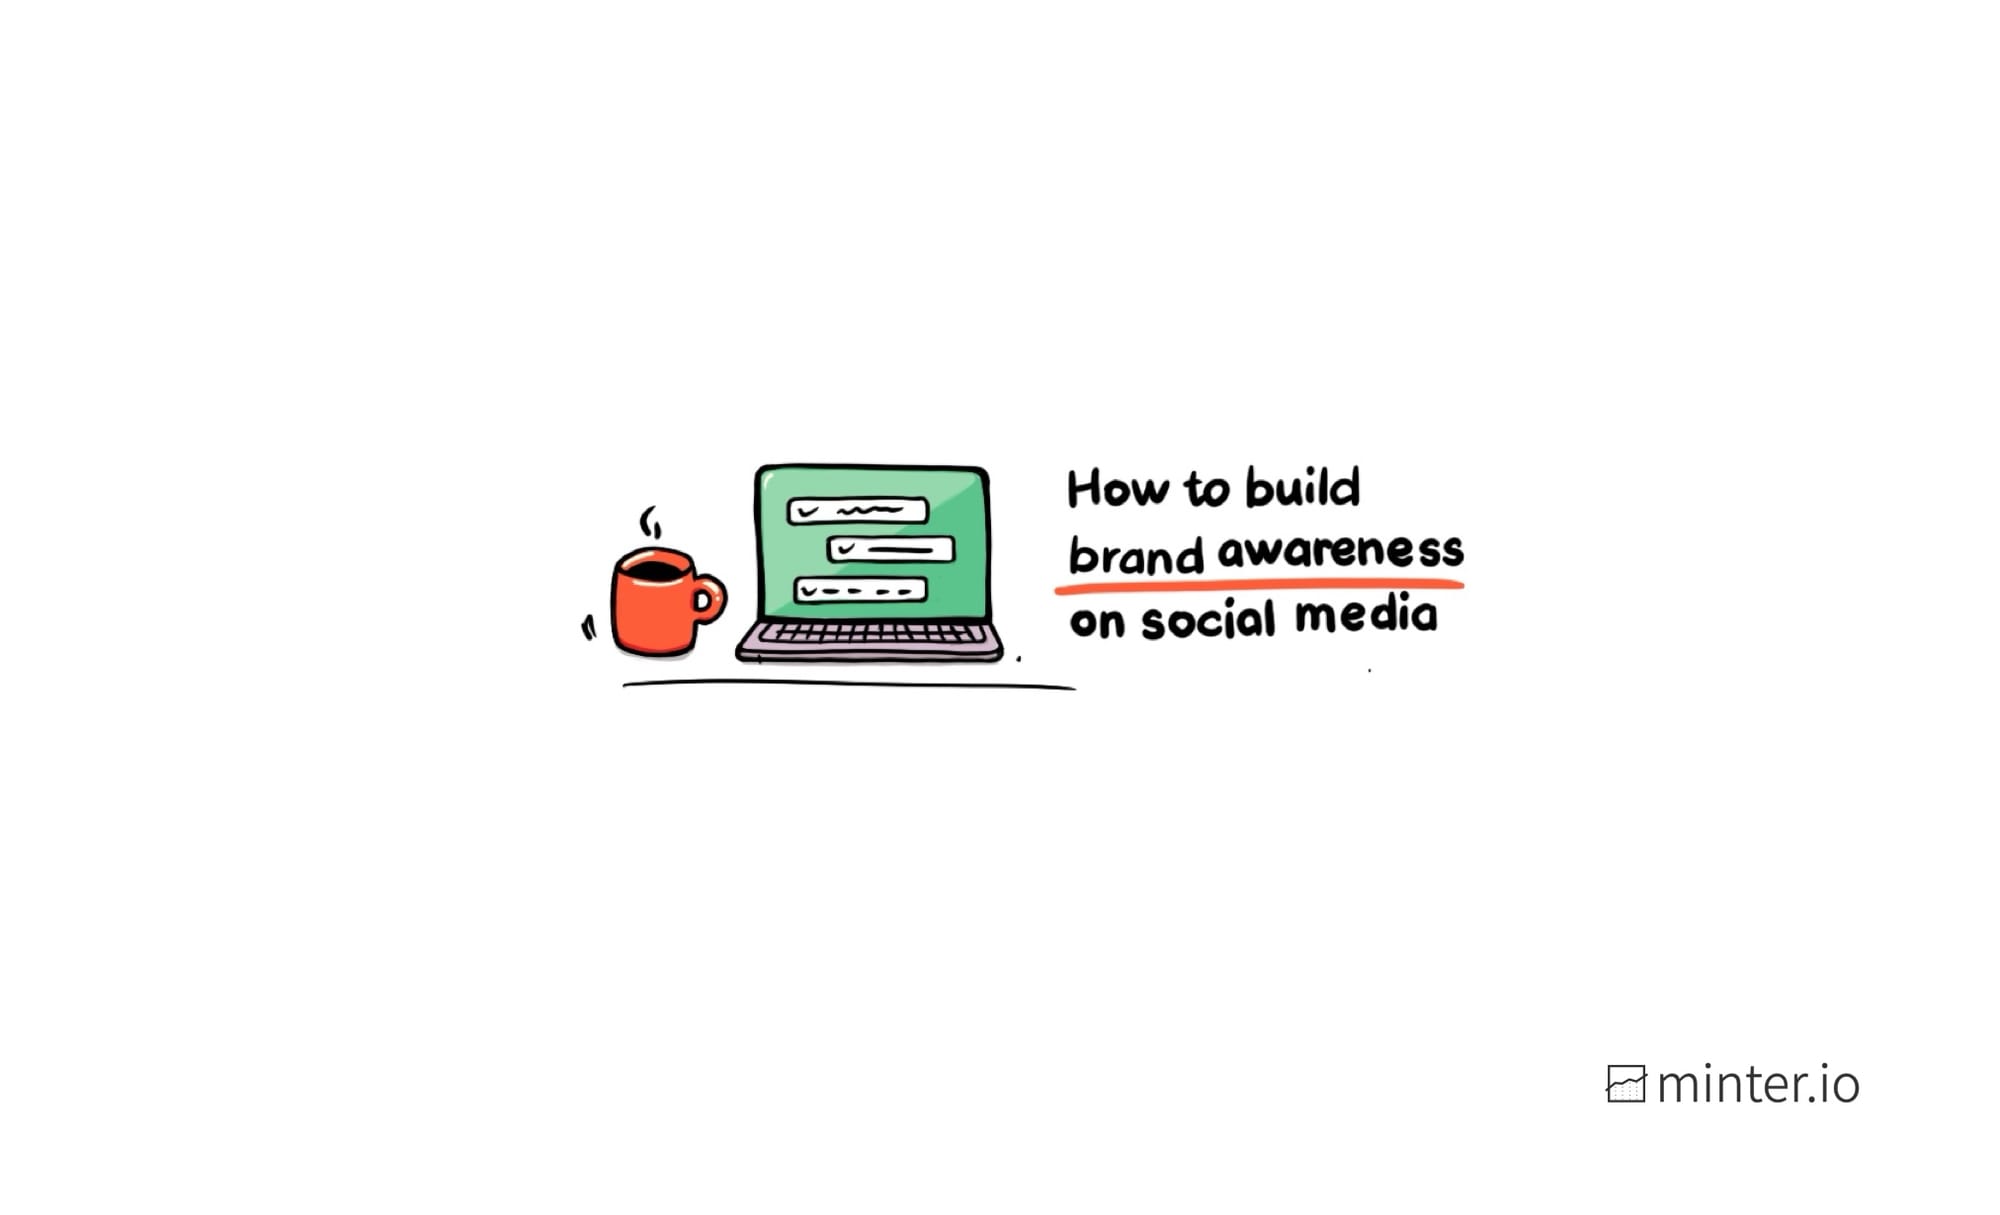 How to build brand awareness on social media